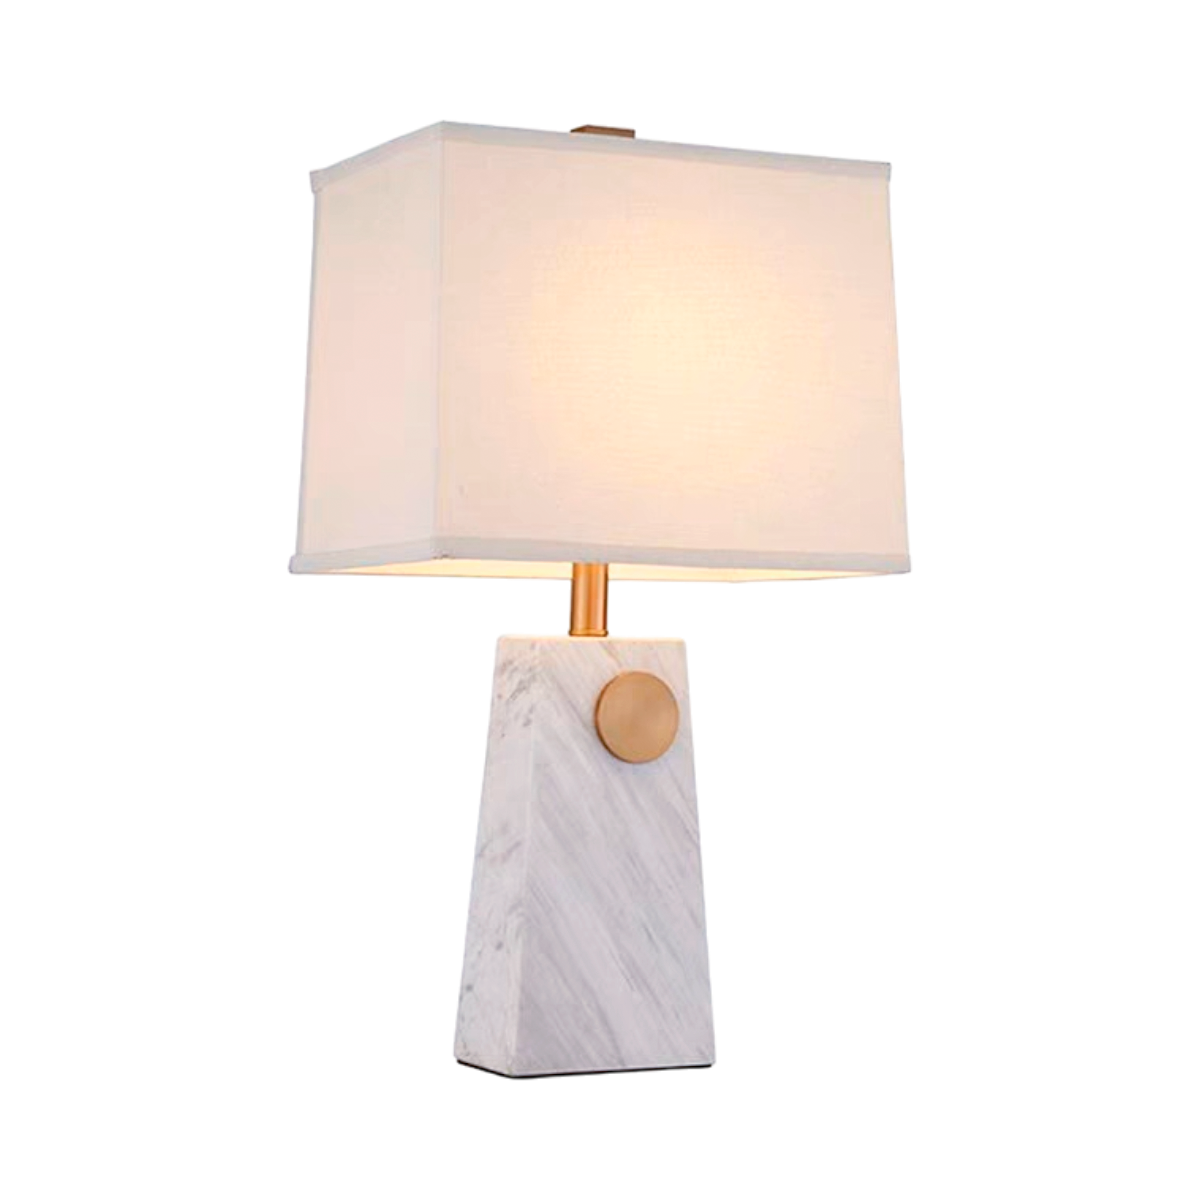 Prism Marble Lamp With Metal Support And Shade  34X63 Cm